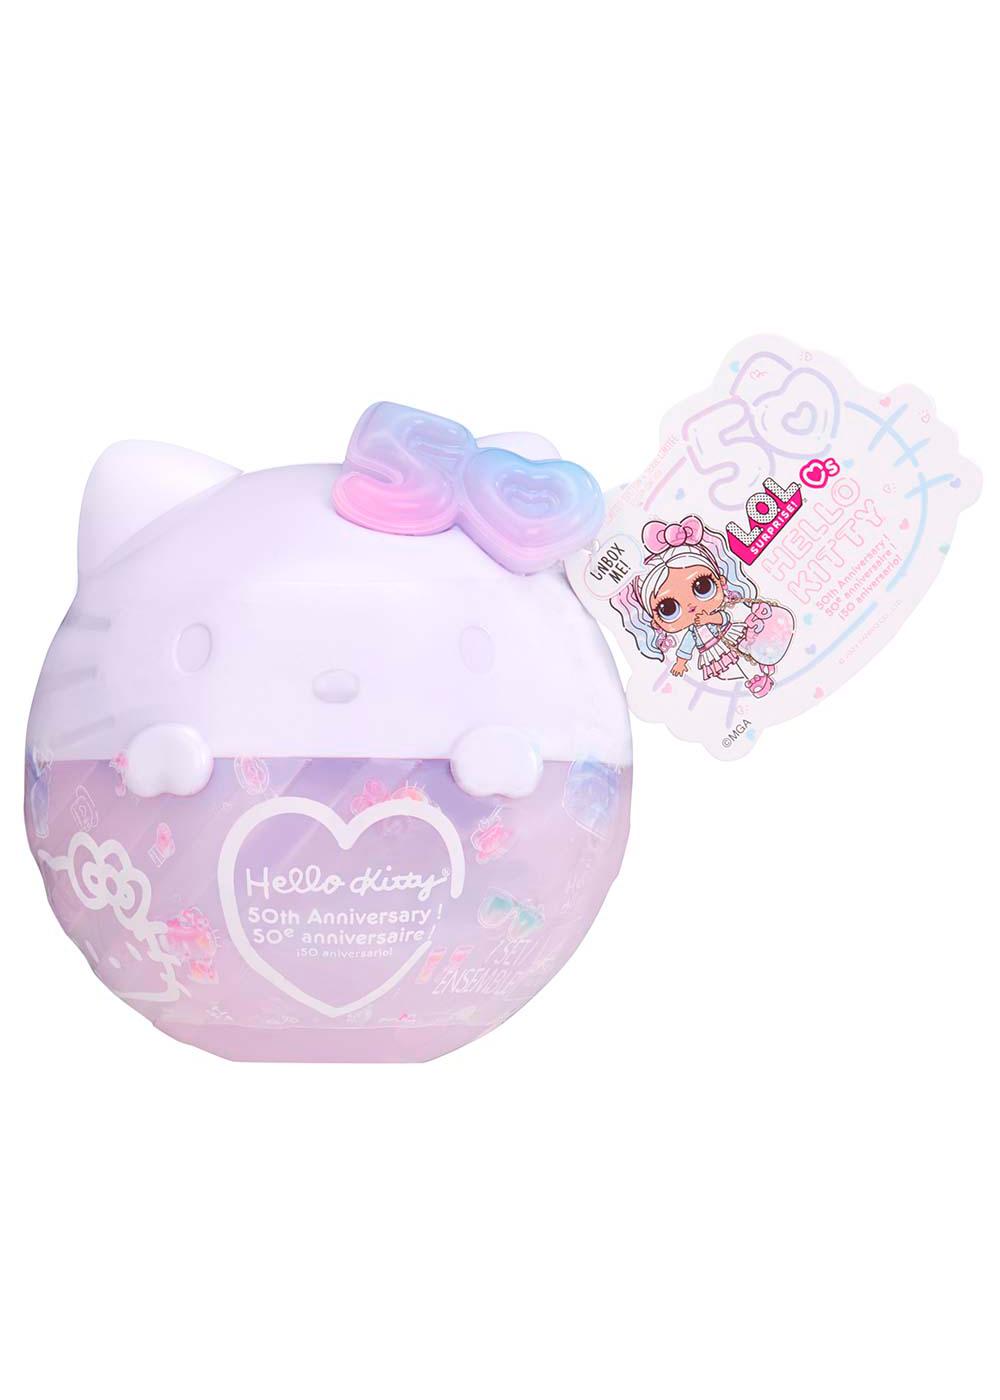 L.O.L. Surprise! Loves Hello Kitty Tots 50th Anniversary Capsule; image 1 of 5